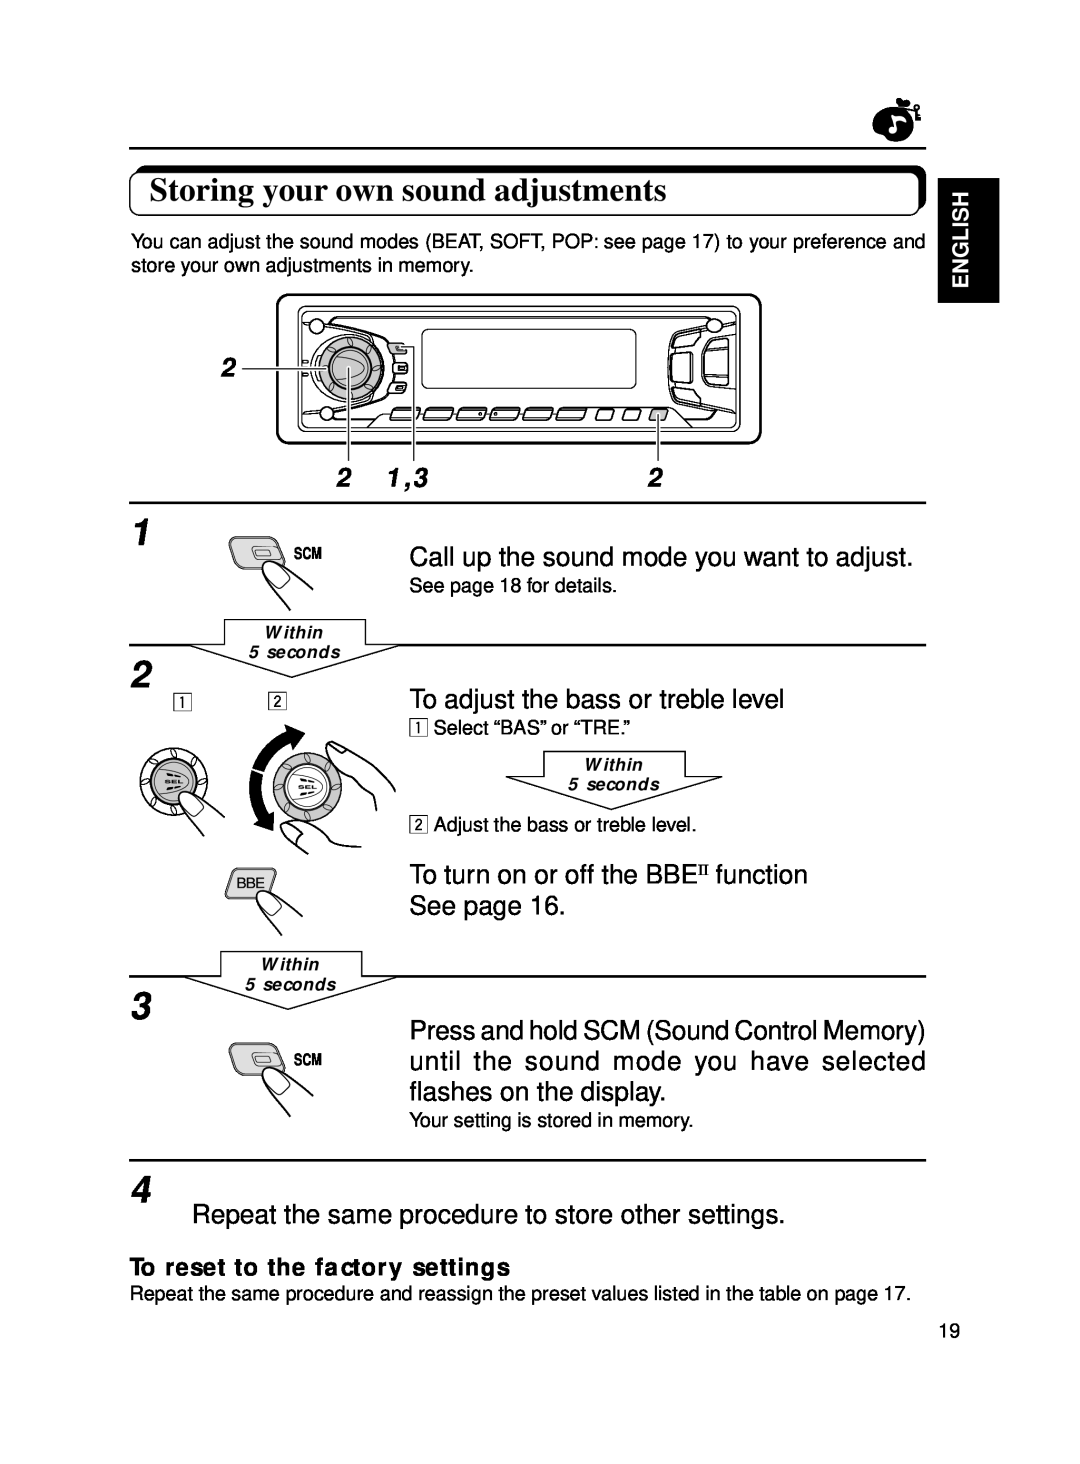 JVC KD-SX870 manual Storing your own sound adjustments, 2 2 1,32, To turn on or off the BBEII function See page, English 